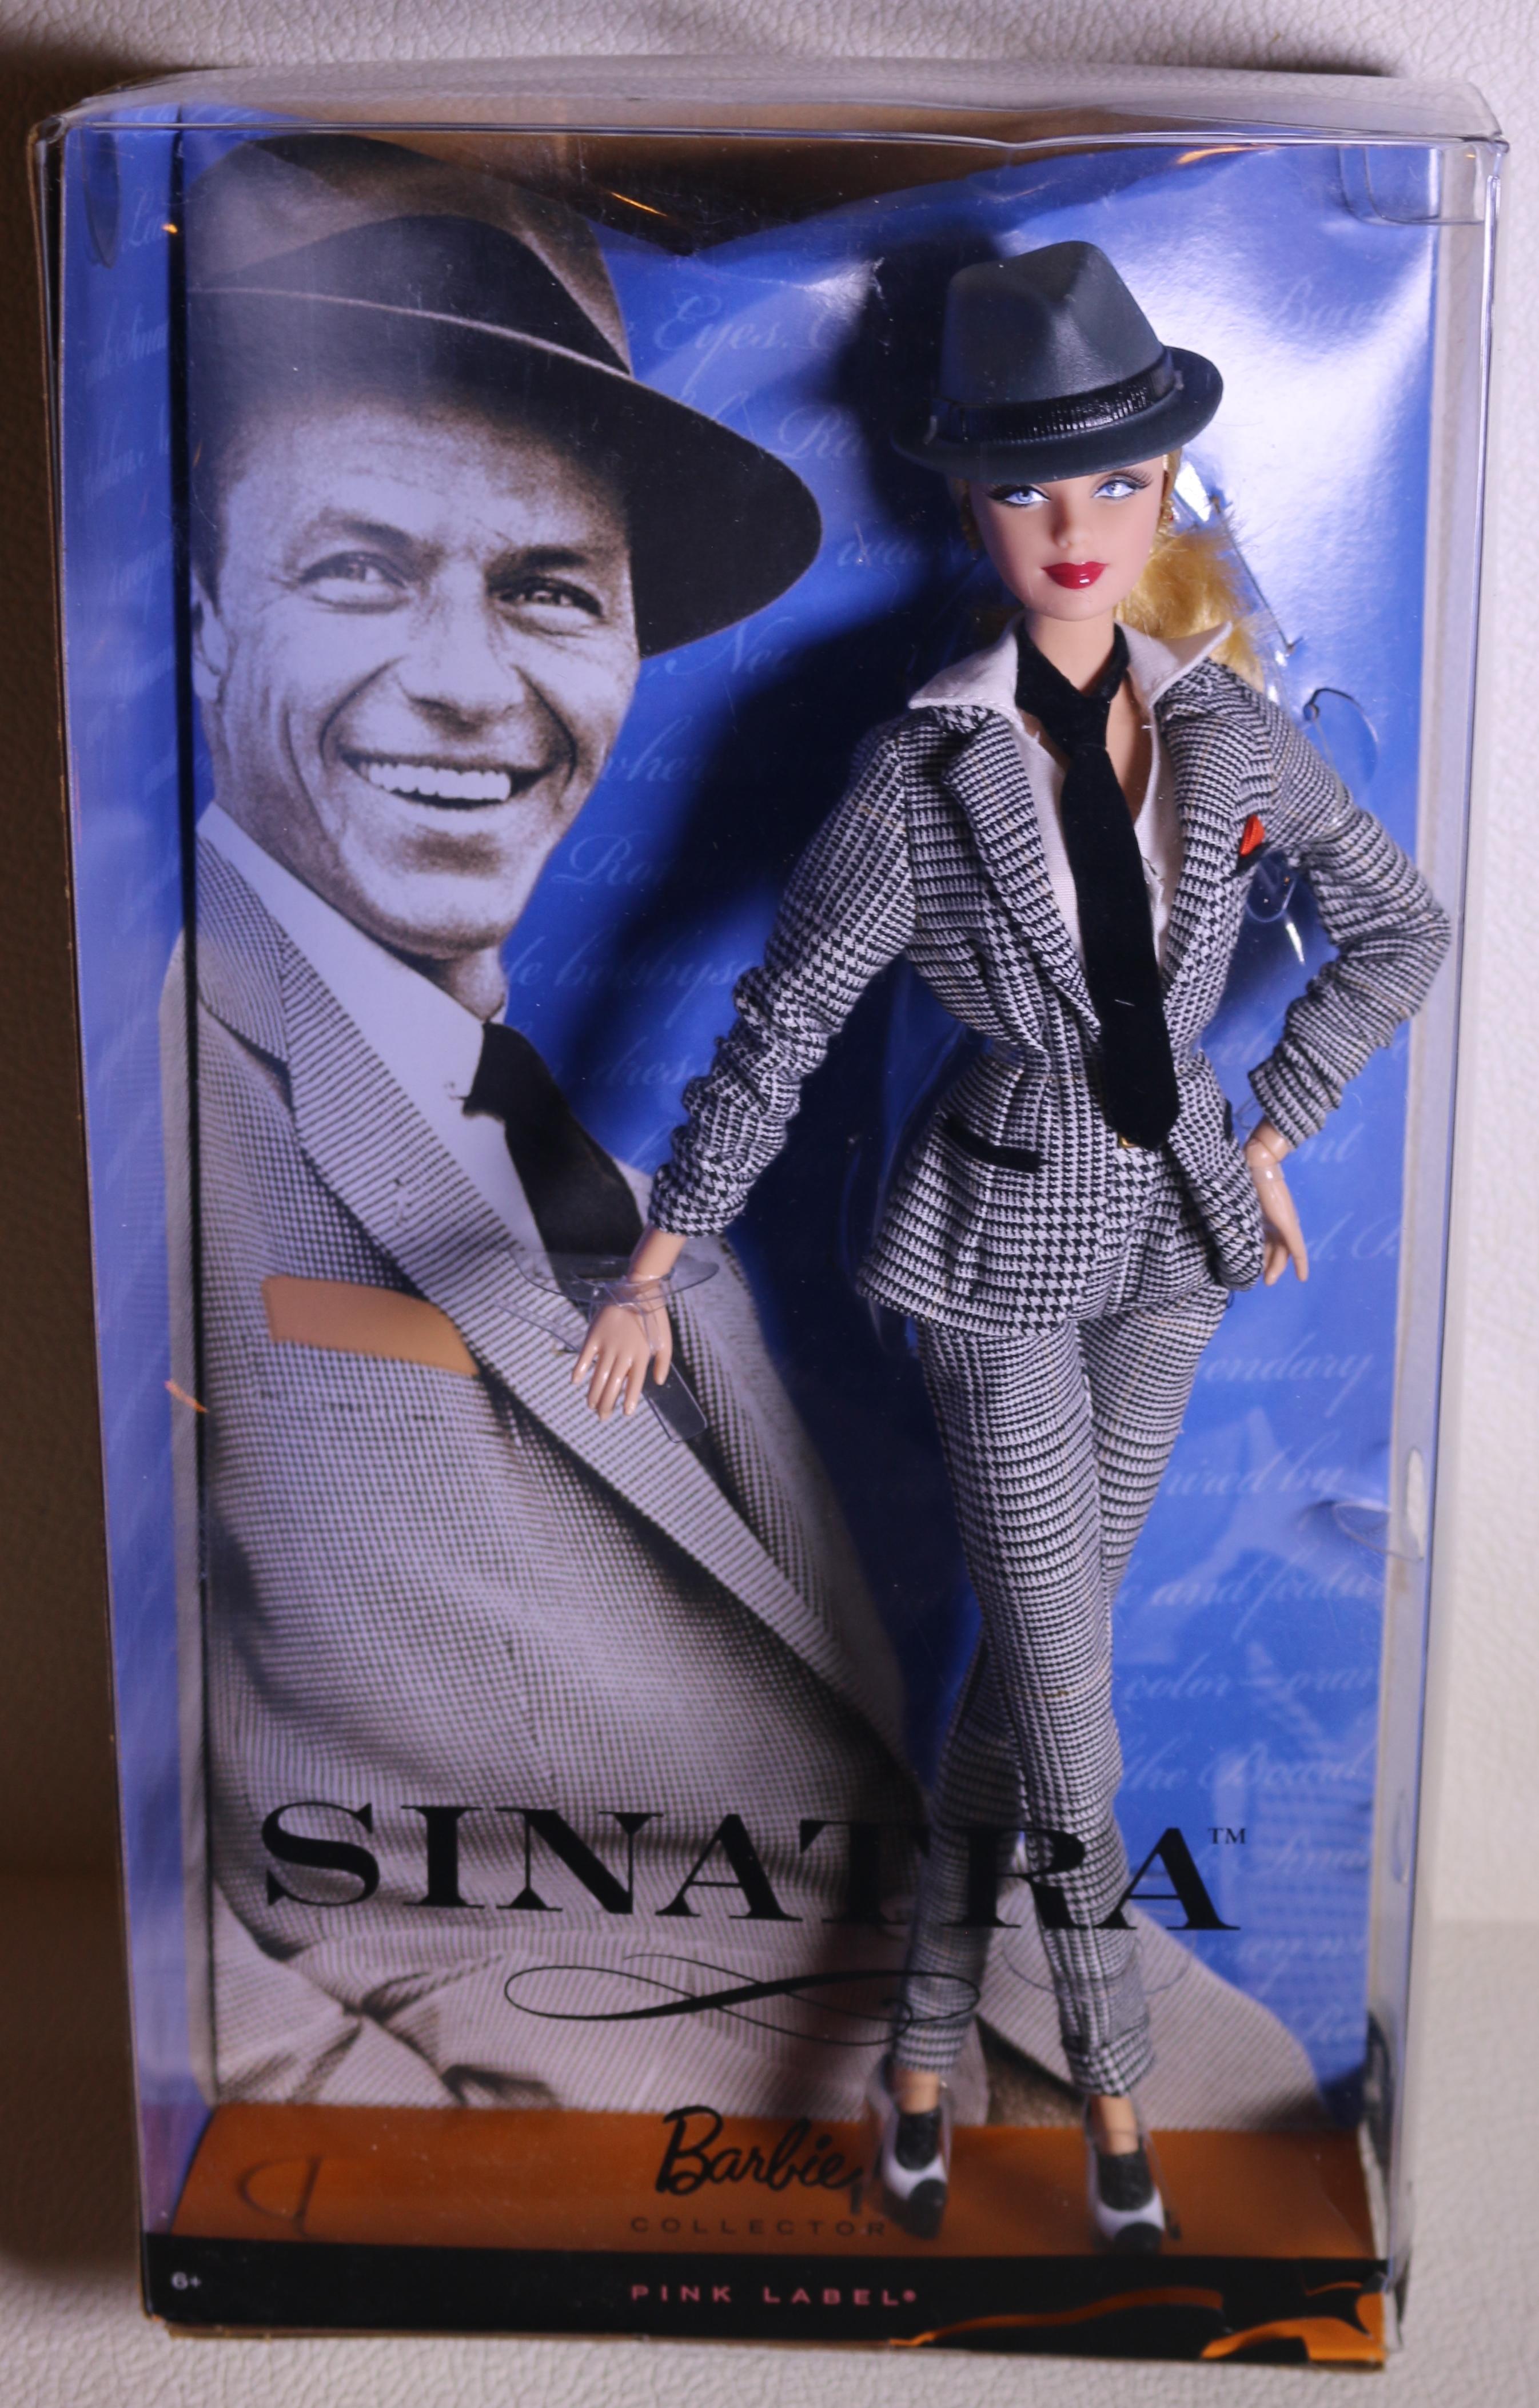 American Share Pink Label 2011 Sinatra Barbie Doll